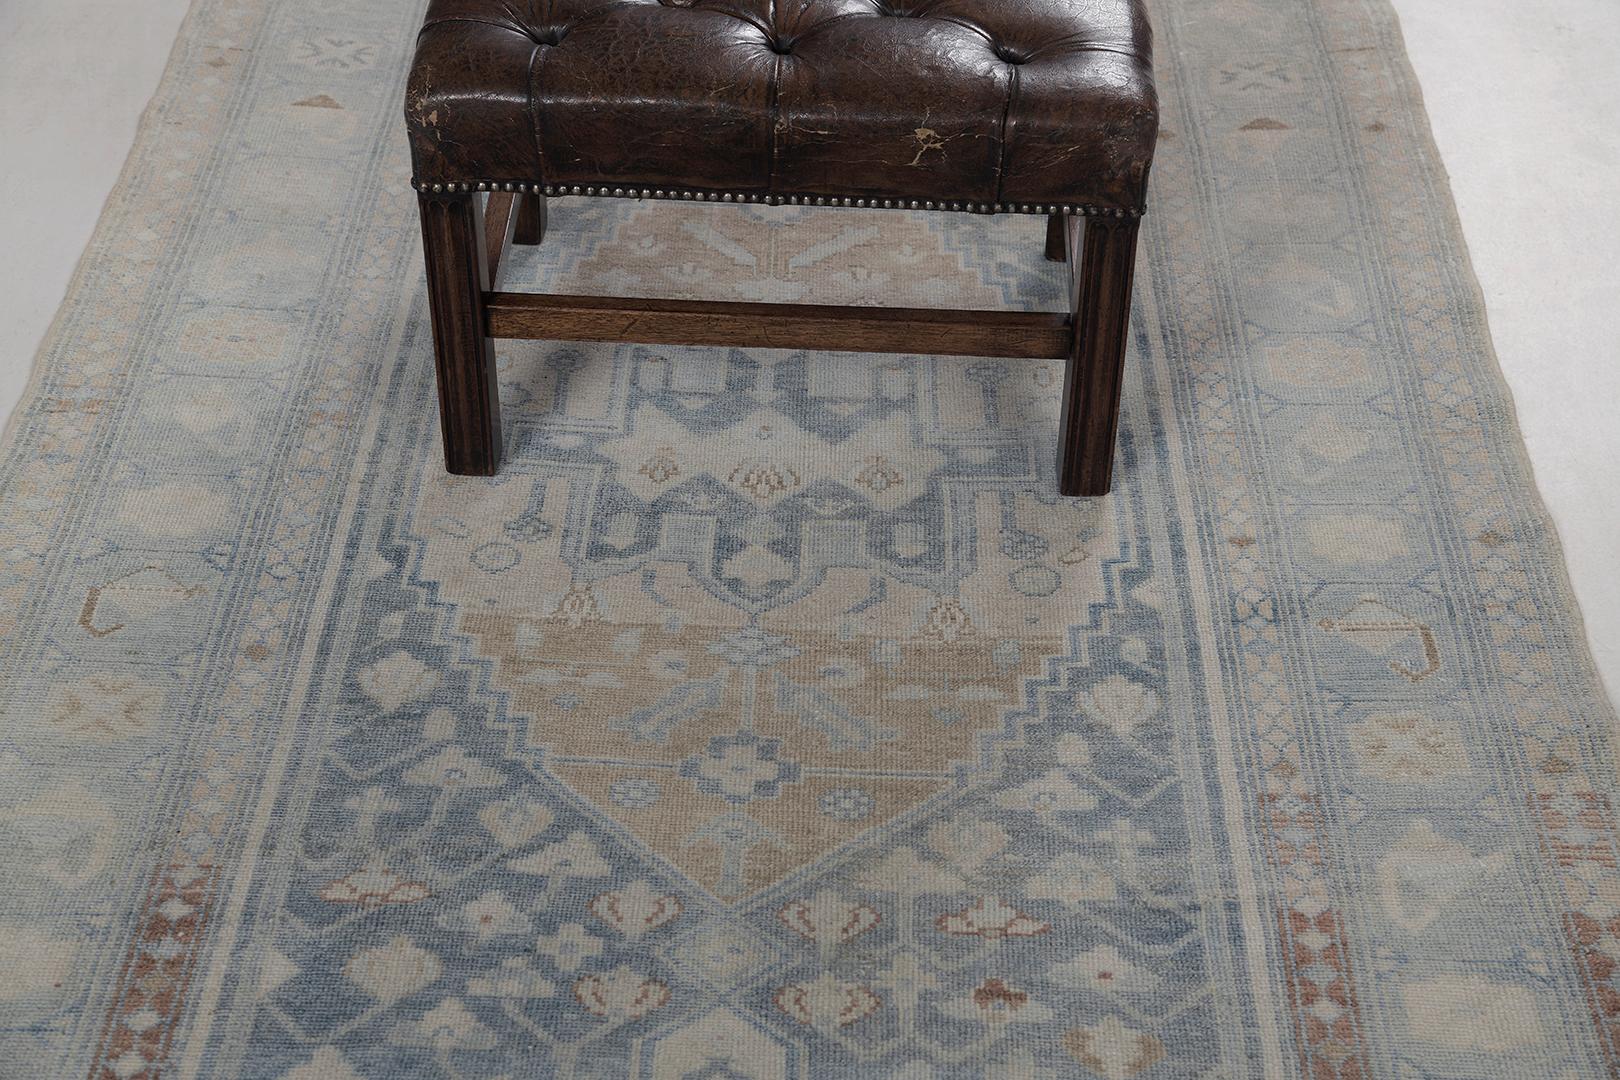 A fascinating Antique Persian Malayer rug that features the warm tones of aegean blue, gold, ivory and sand in the most sought after earthy colour palette. Various central medallions overlaid in a majestic botanical patterns create an alluring